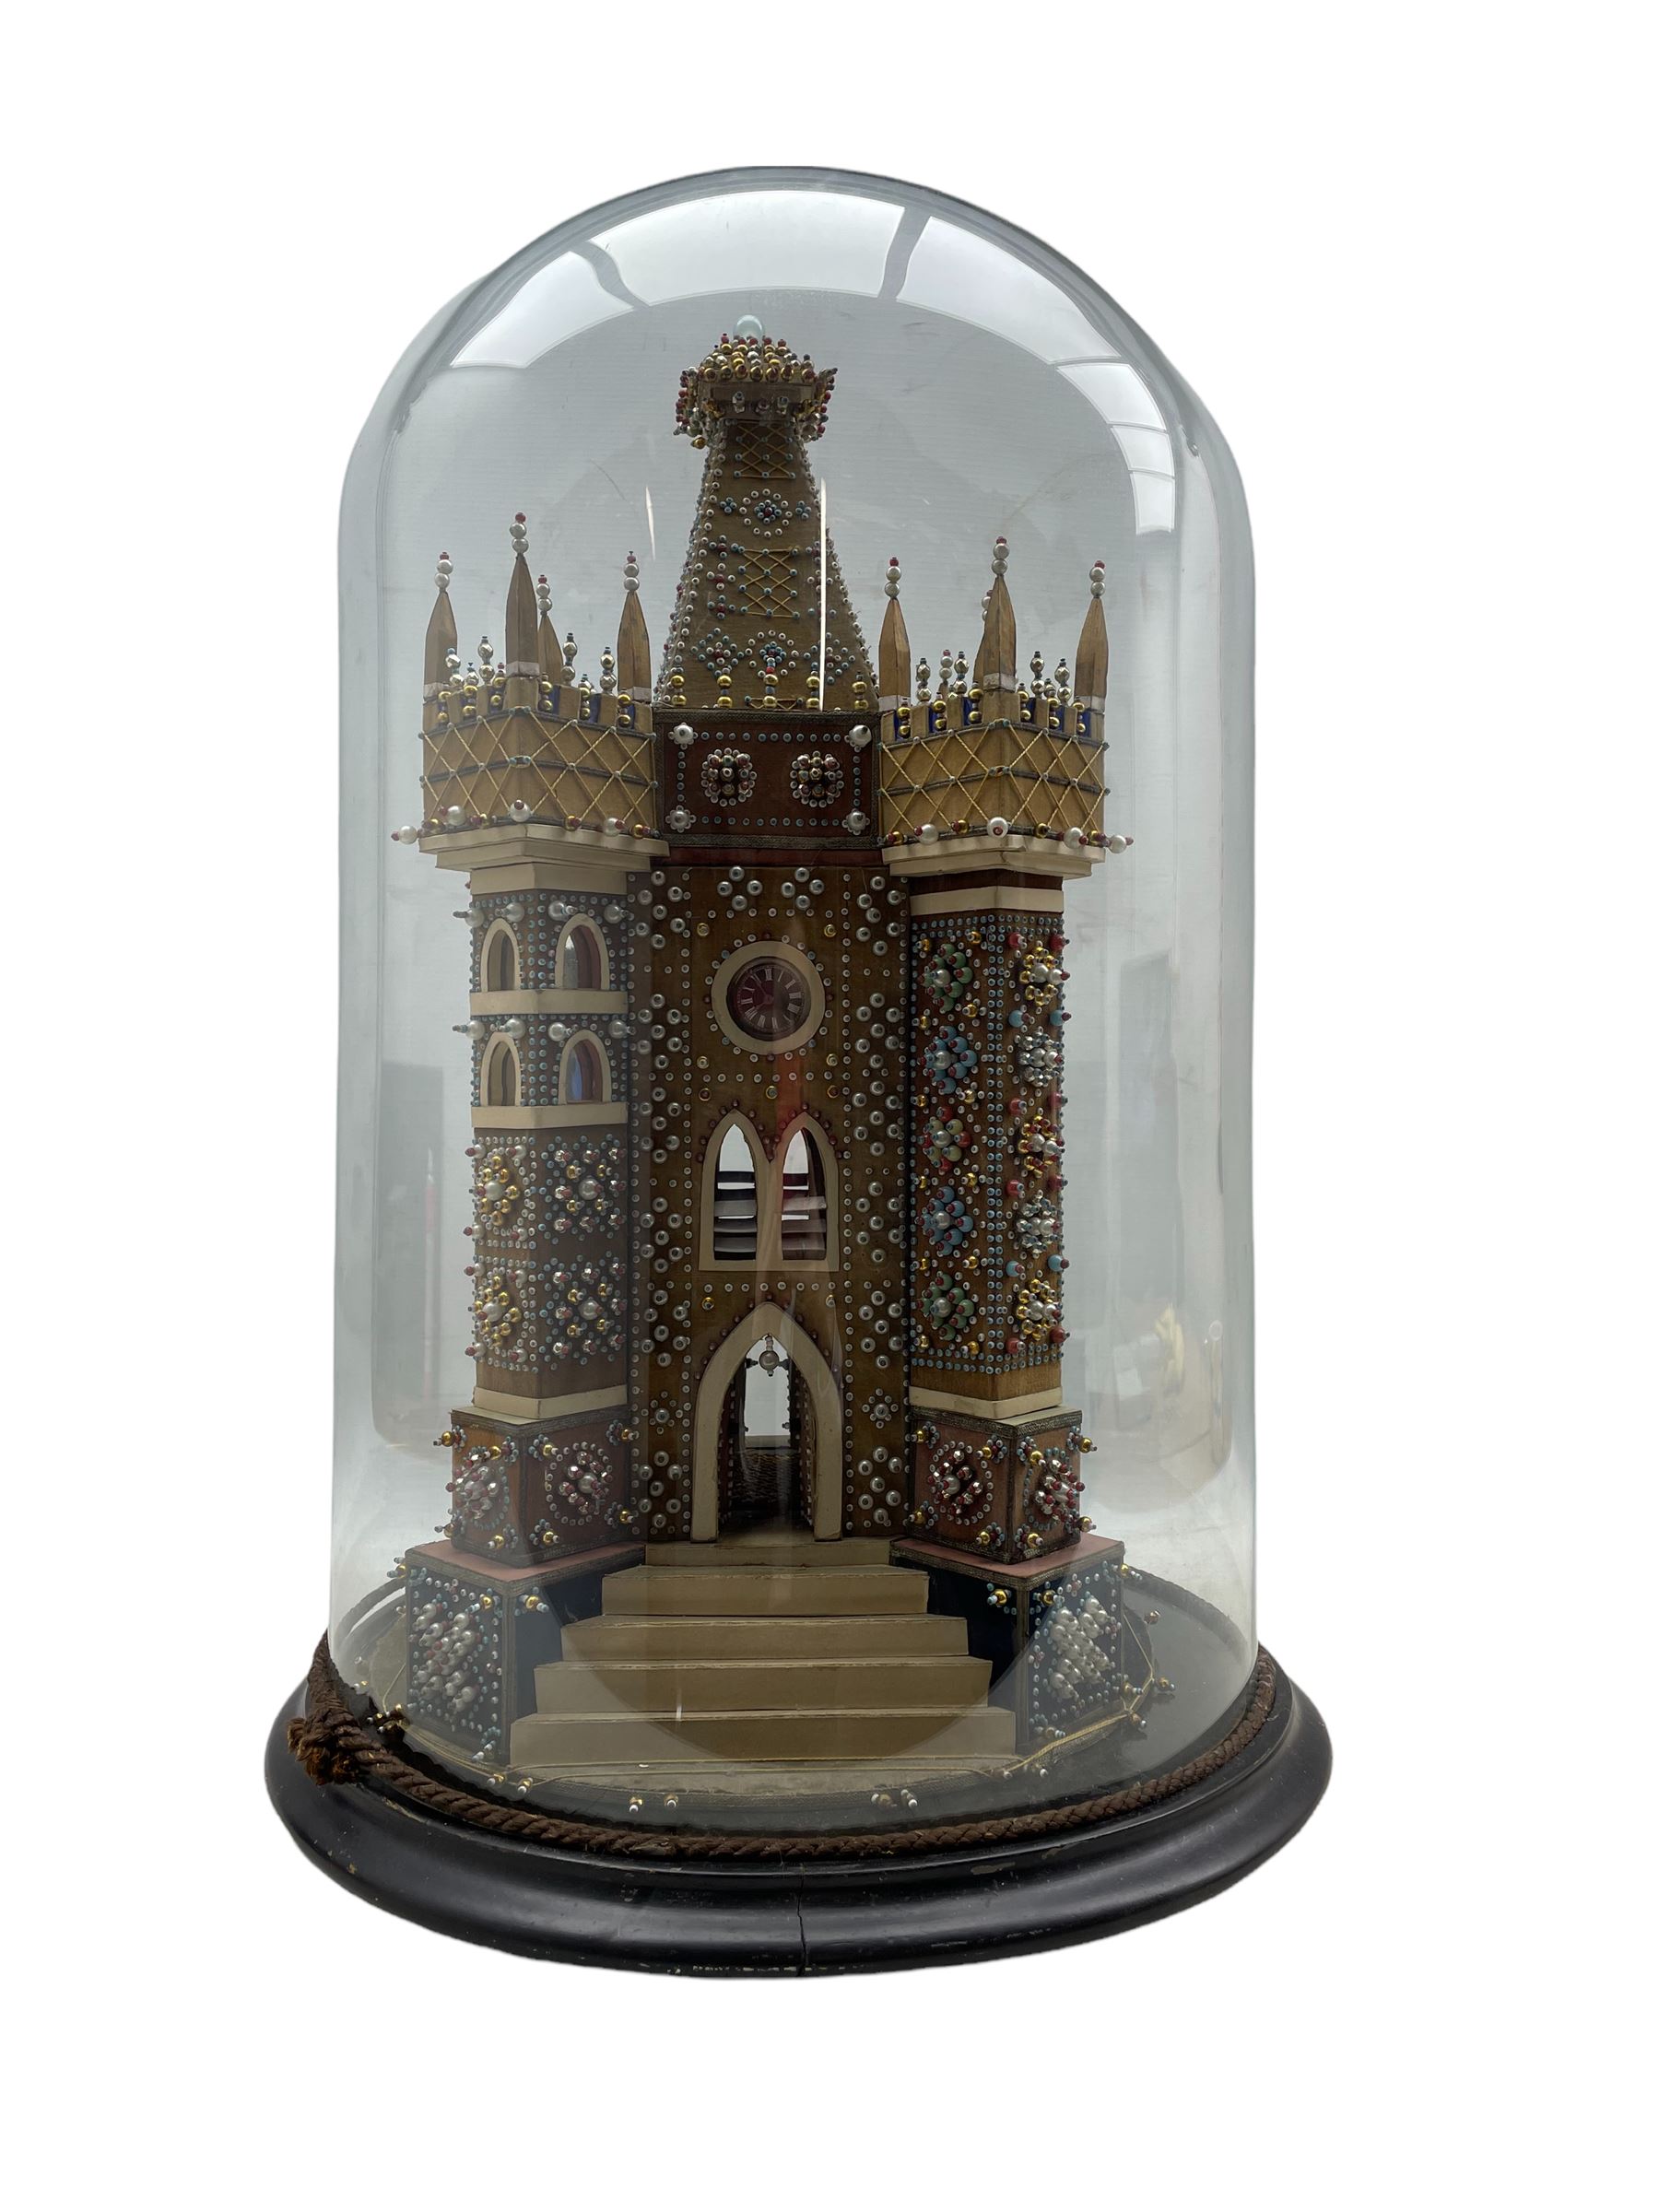 Edwardian velvet and beadwork model of a Church tower dated 1910 - Image 4 of 5